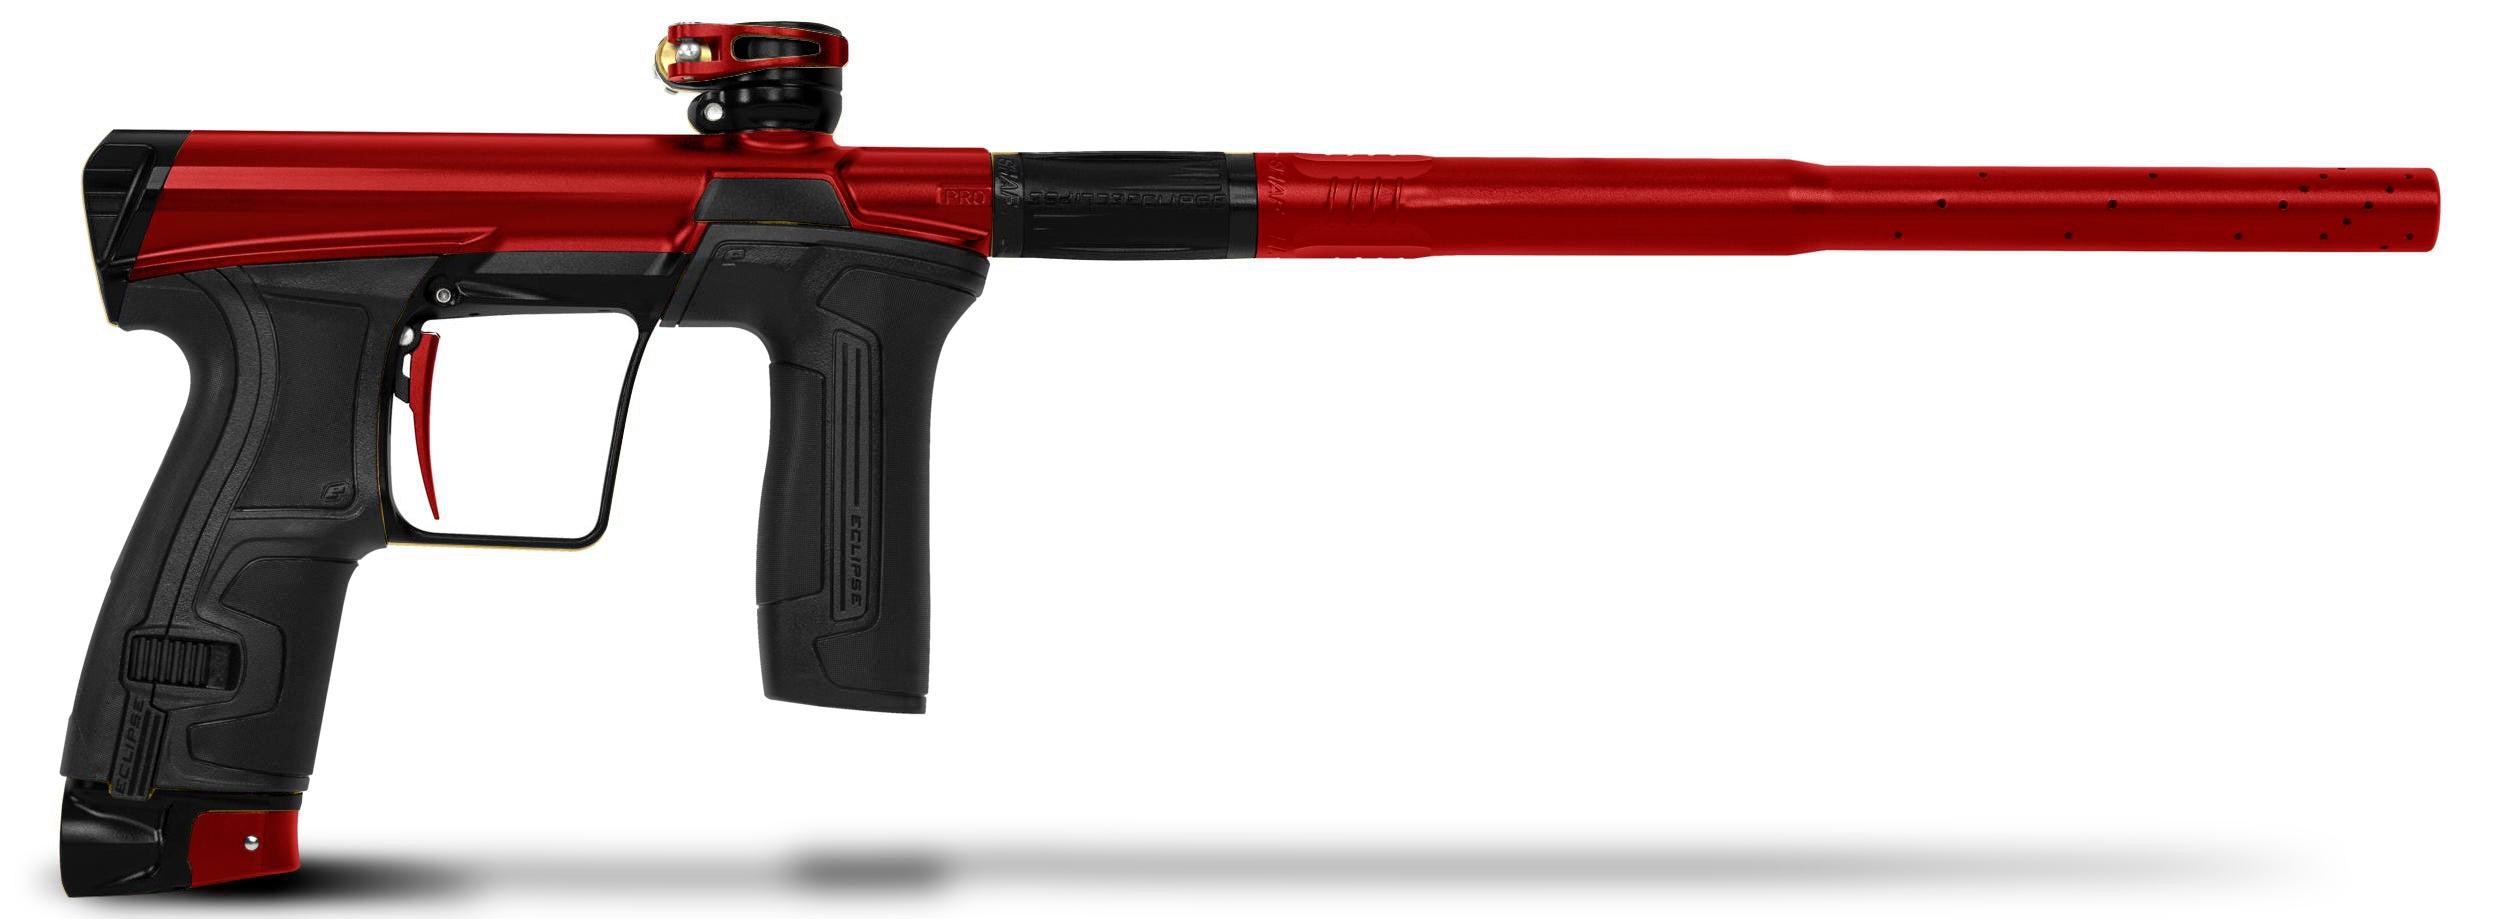 Planet Eclipse CS2 Pro Paintball Marker - Red / Black